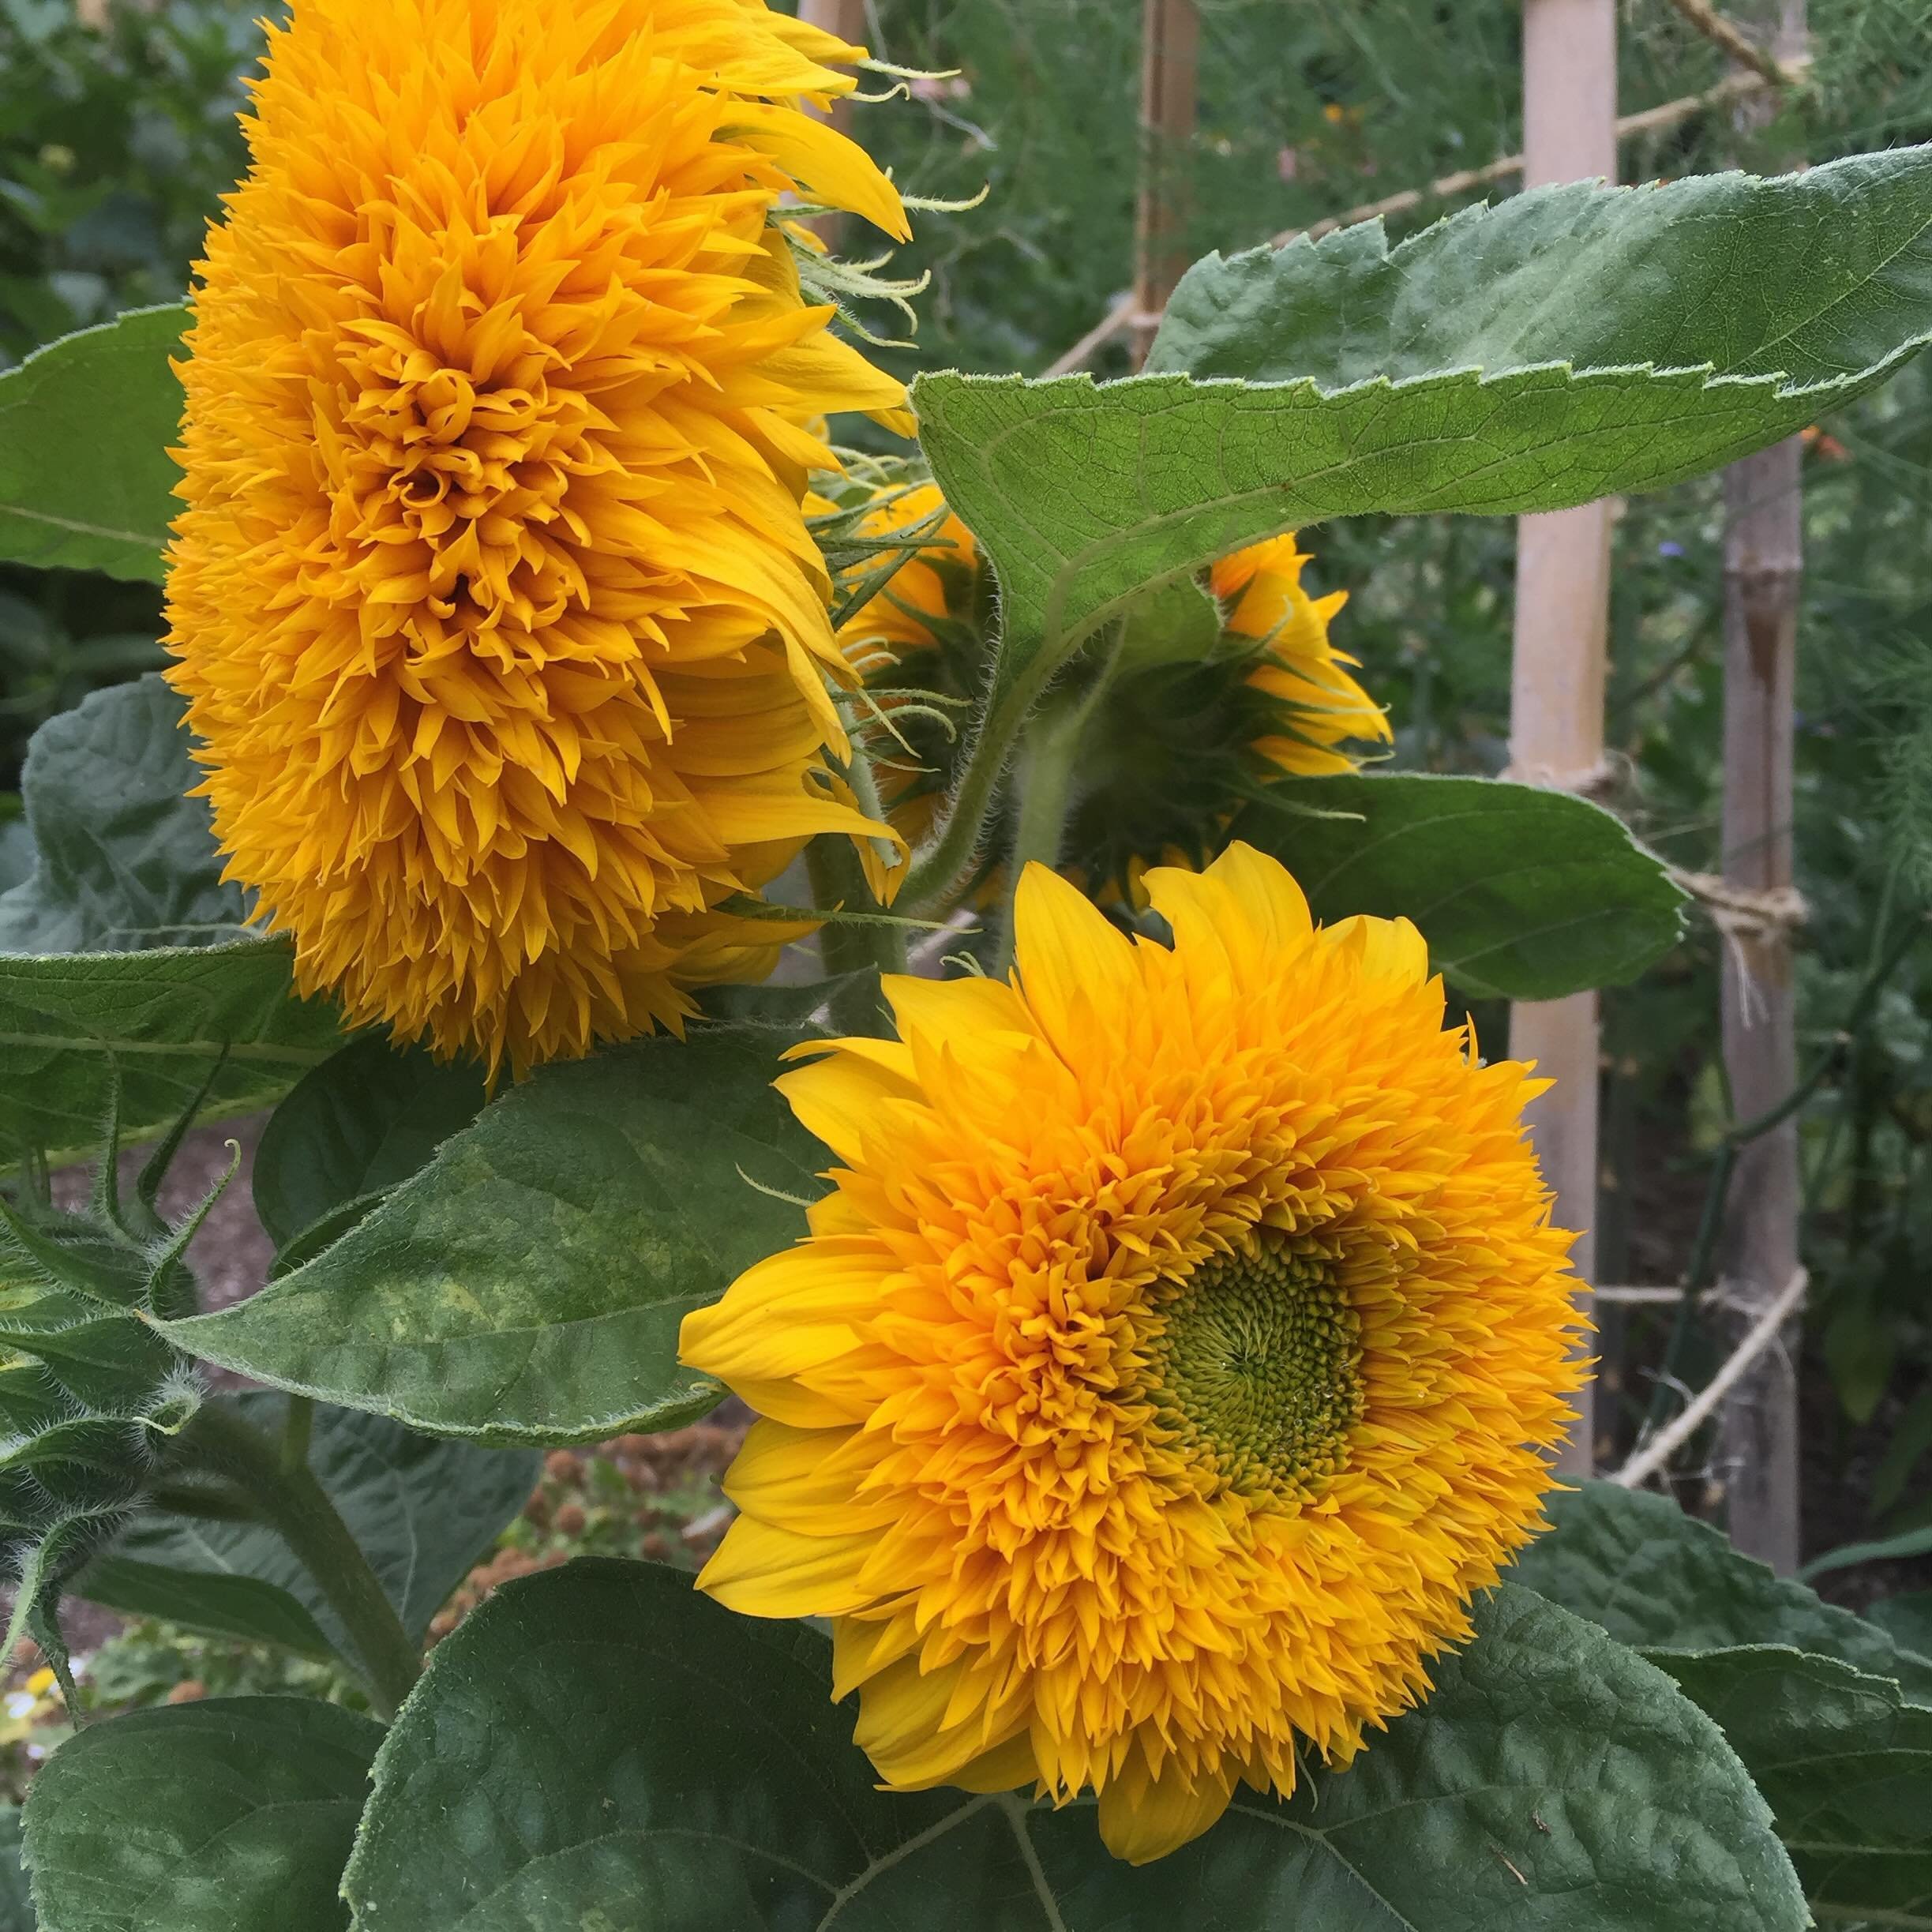 🌻🌻🌻 Finally warming up enough here to think about planting sunflowers! Goldy Double has fully double blooms which are like a fluffy, sunny, teddybear, and they make the most luscious bouquets. #goldydoublesunflower